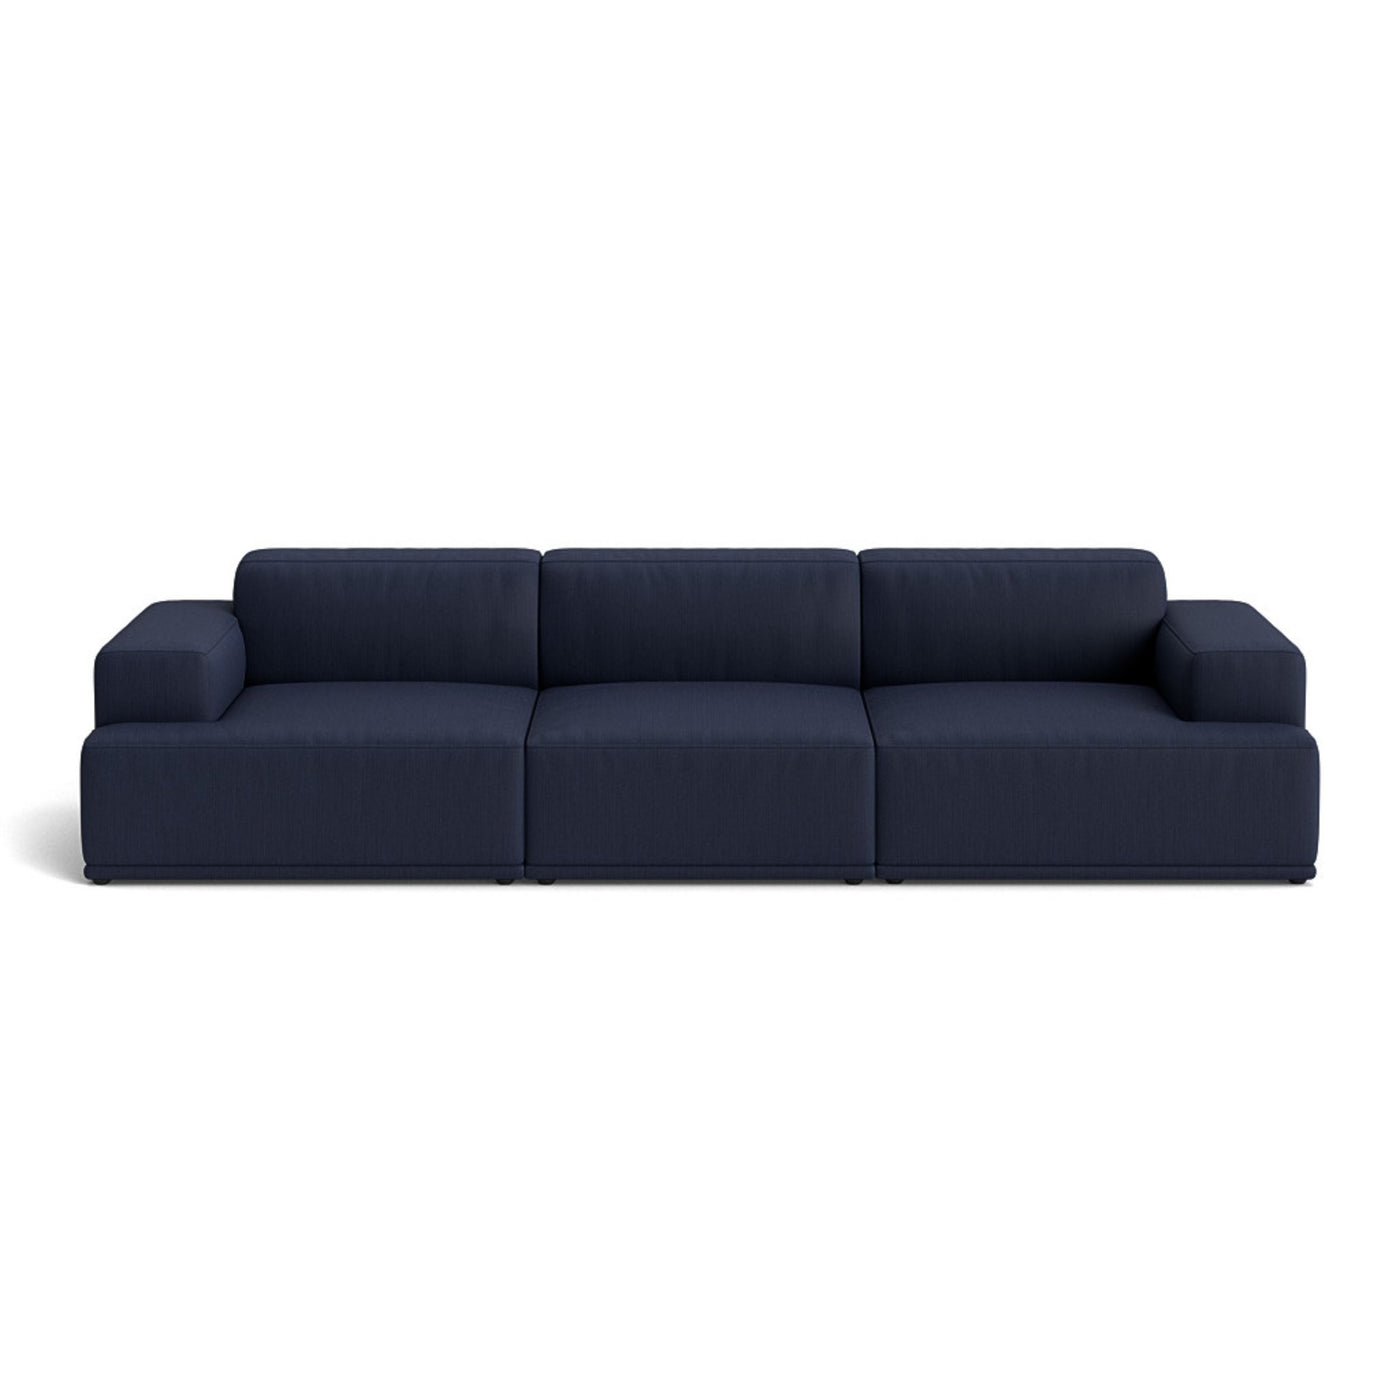 Muuto Connect Soft Modular 3 Seater Sofa, configuration 1. Made-to-order from someday designs. #colour_balder-782